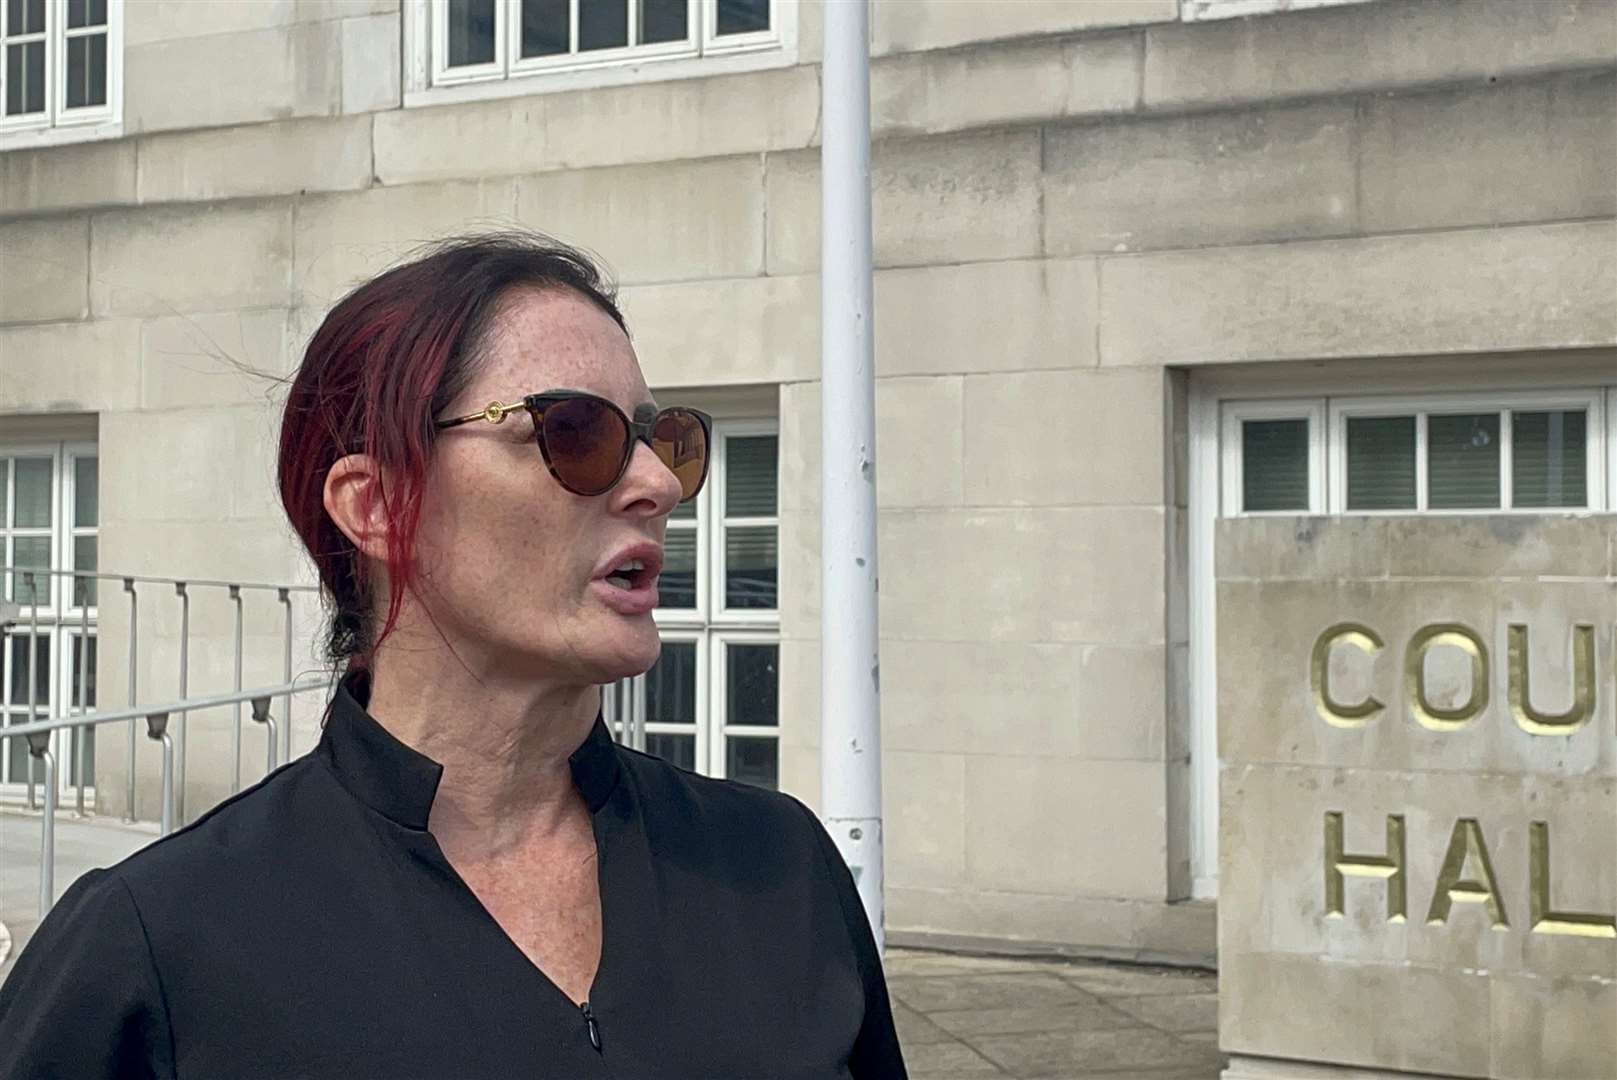 Nicola Foster, mother of Samantha Mulcahy, speaking outside Maidstone Coroners Court